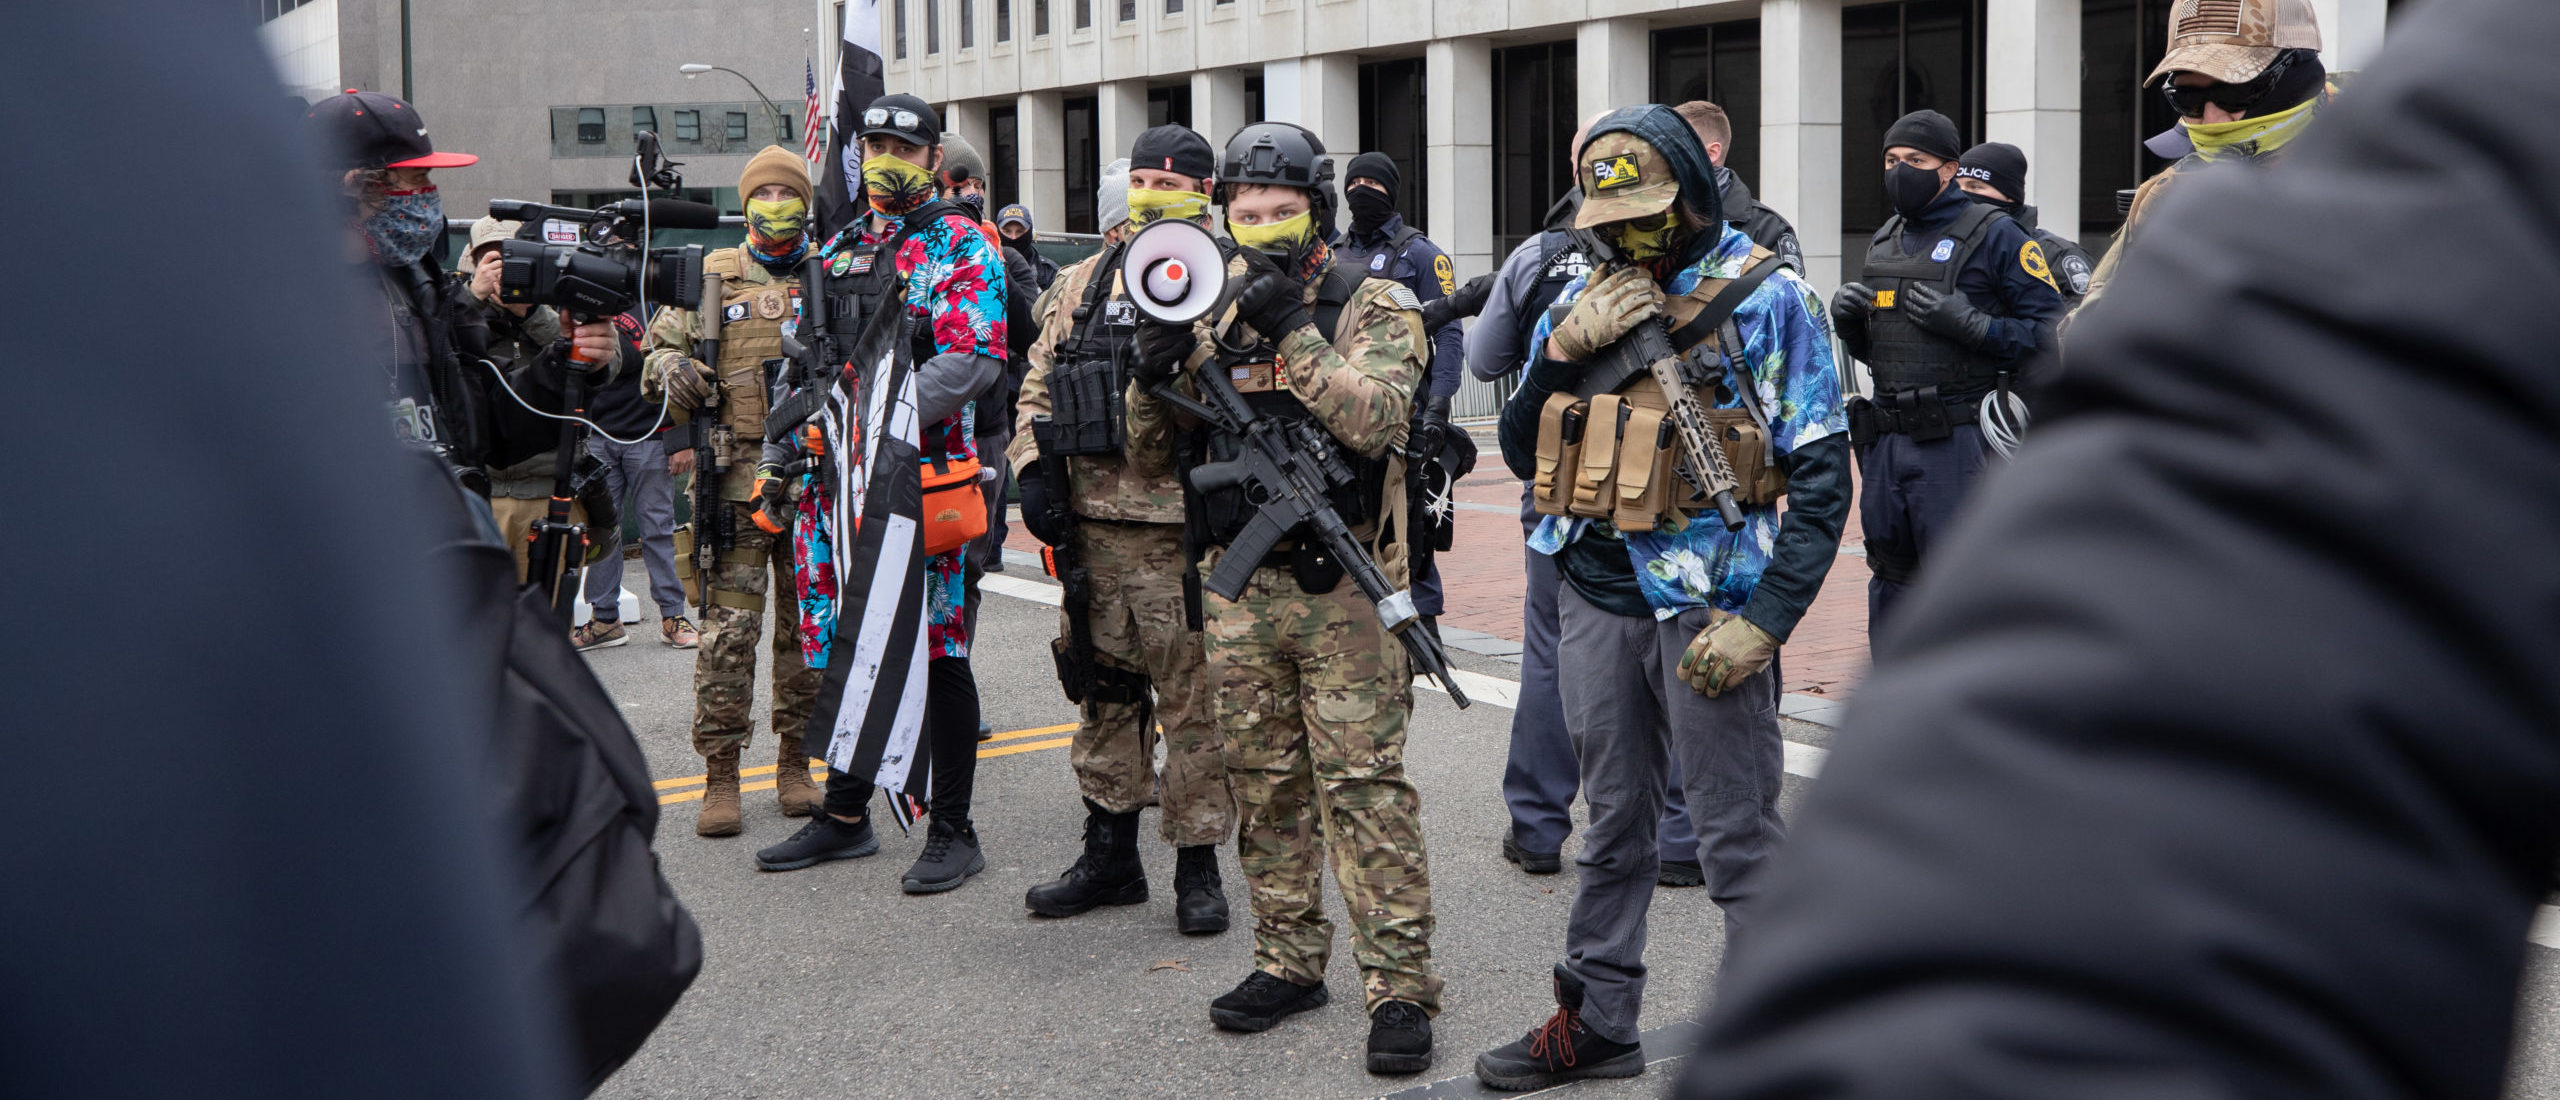 Self-described leader of the Boogaloo Bois, Mike Dunn, addressed a crowd mostly made up of media and law enforcement in Richmond, Virginia, on Jan. 18, 2021. (Kaylee Greenlee - Daily Caller News Foundation)